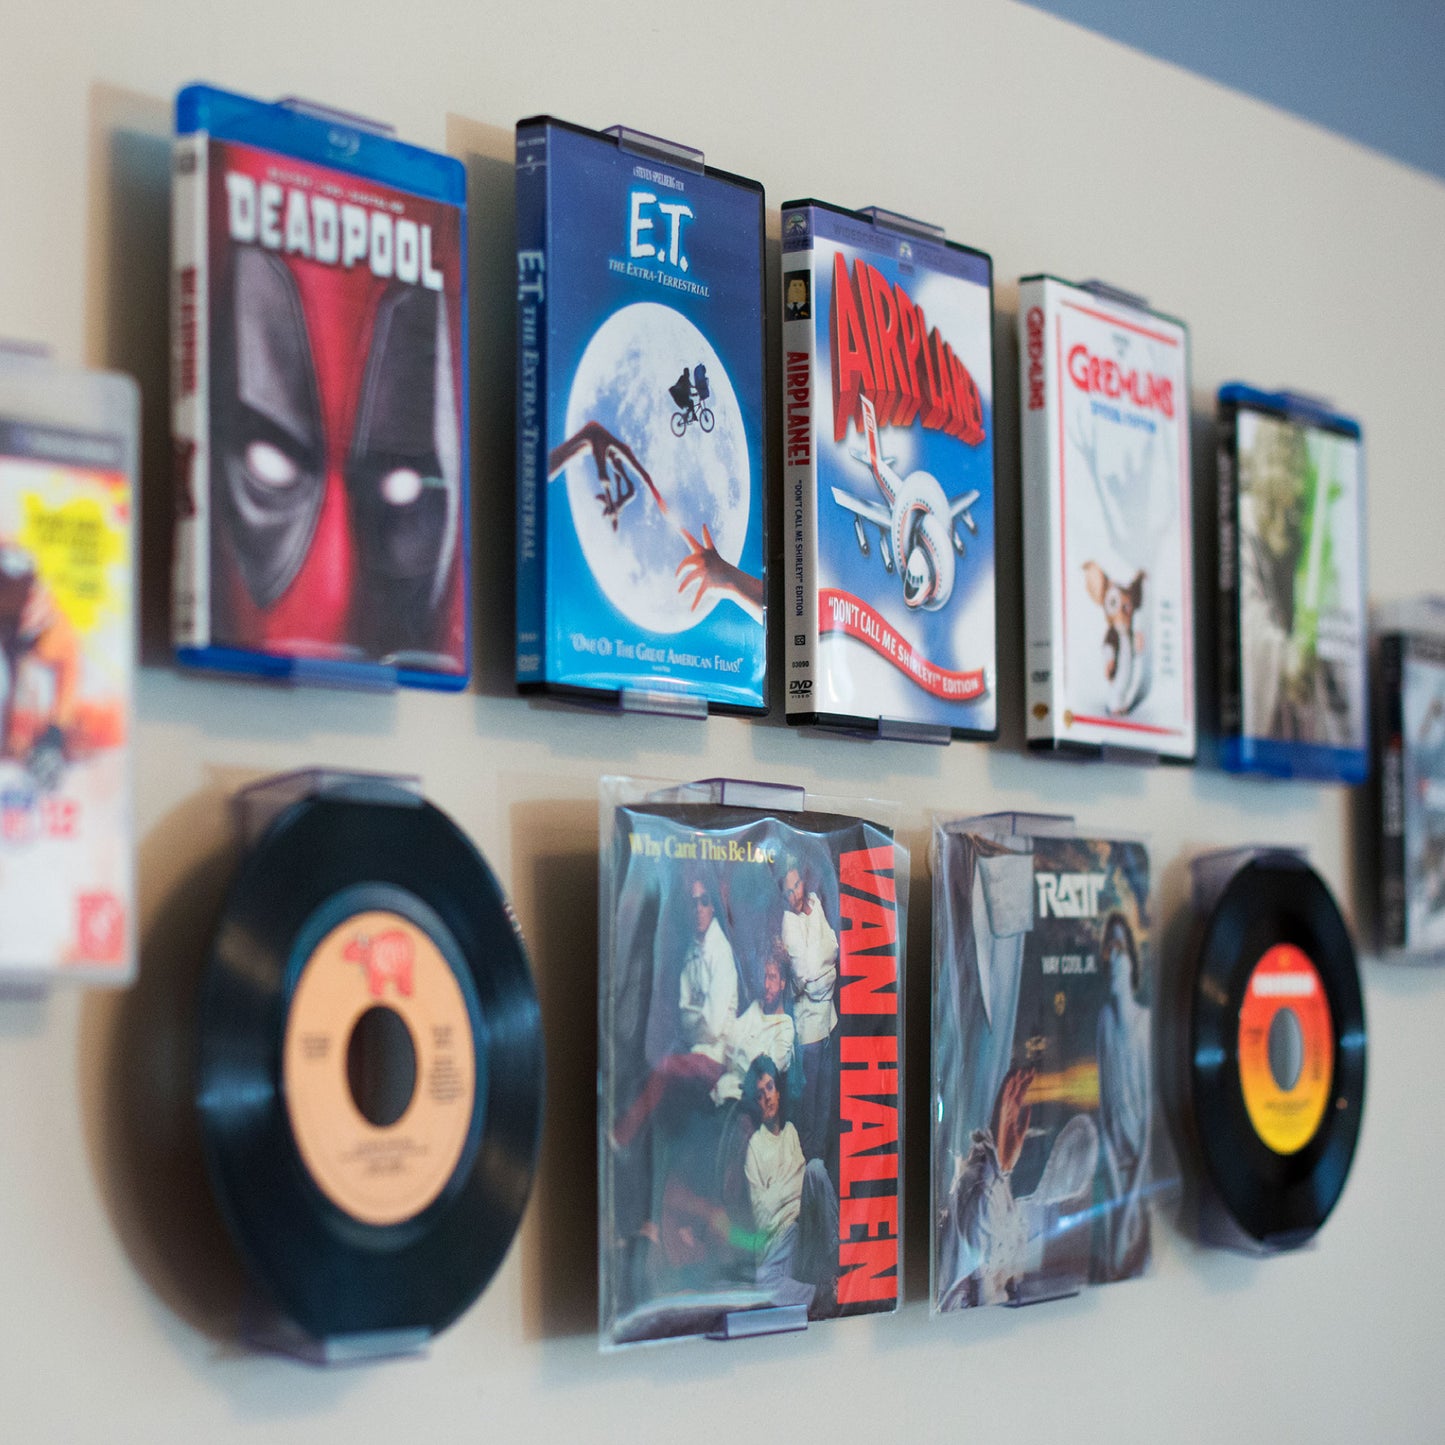 DVDMount Video Game, 45 Record and Blu-Ray Frame Display